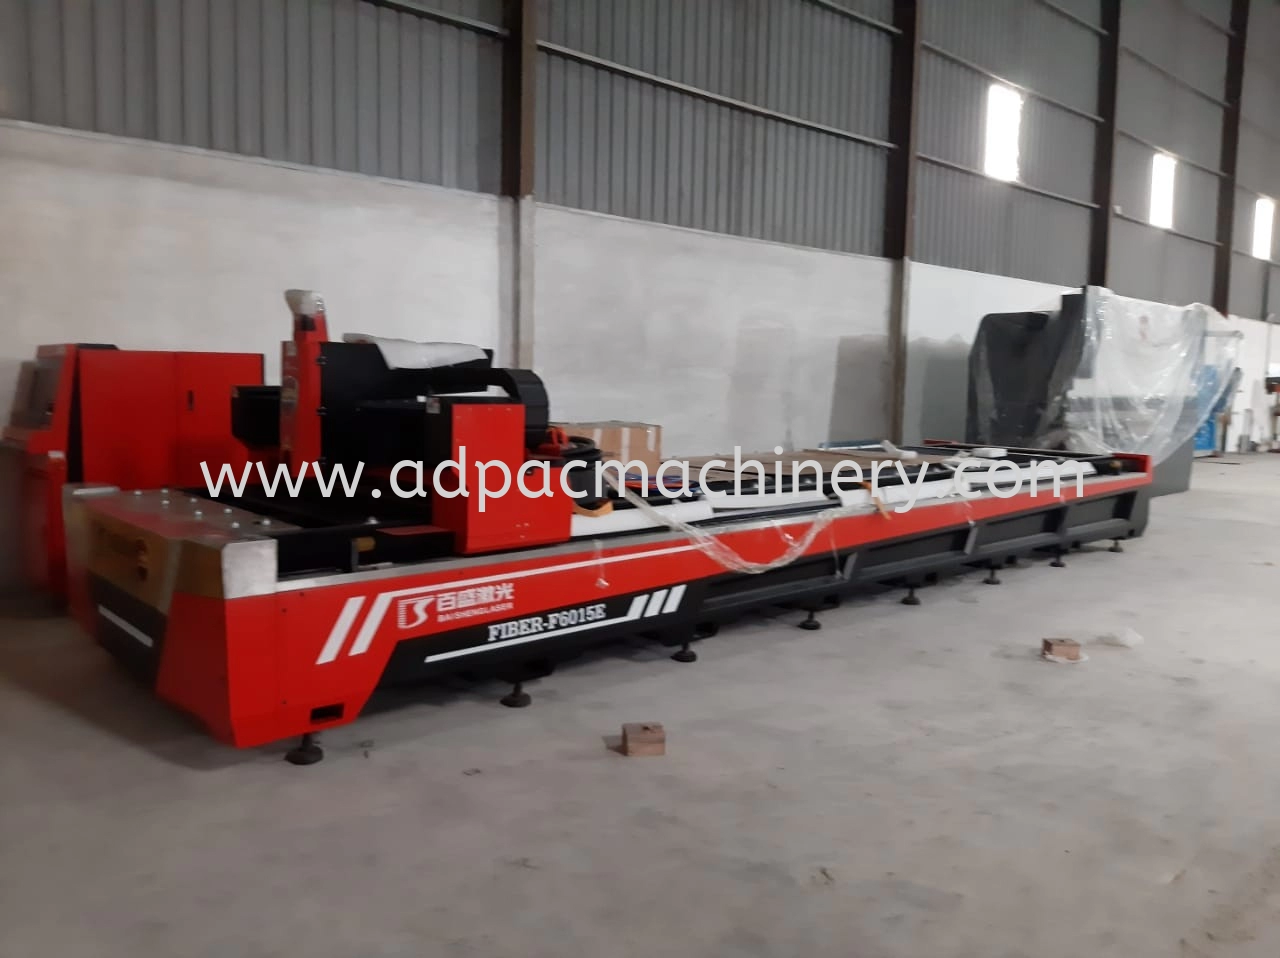 Delivery of New Fiber Laser Cutting Machine & APM Bending Machine